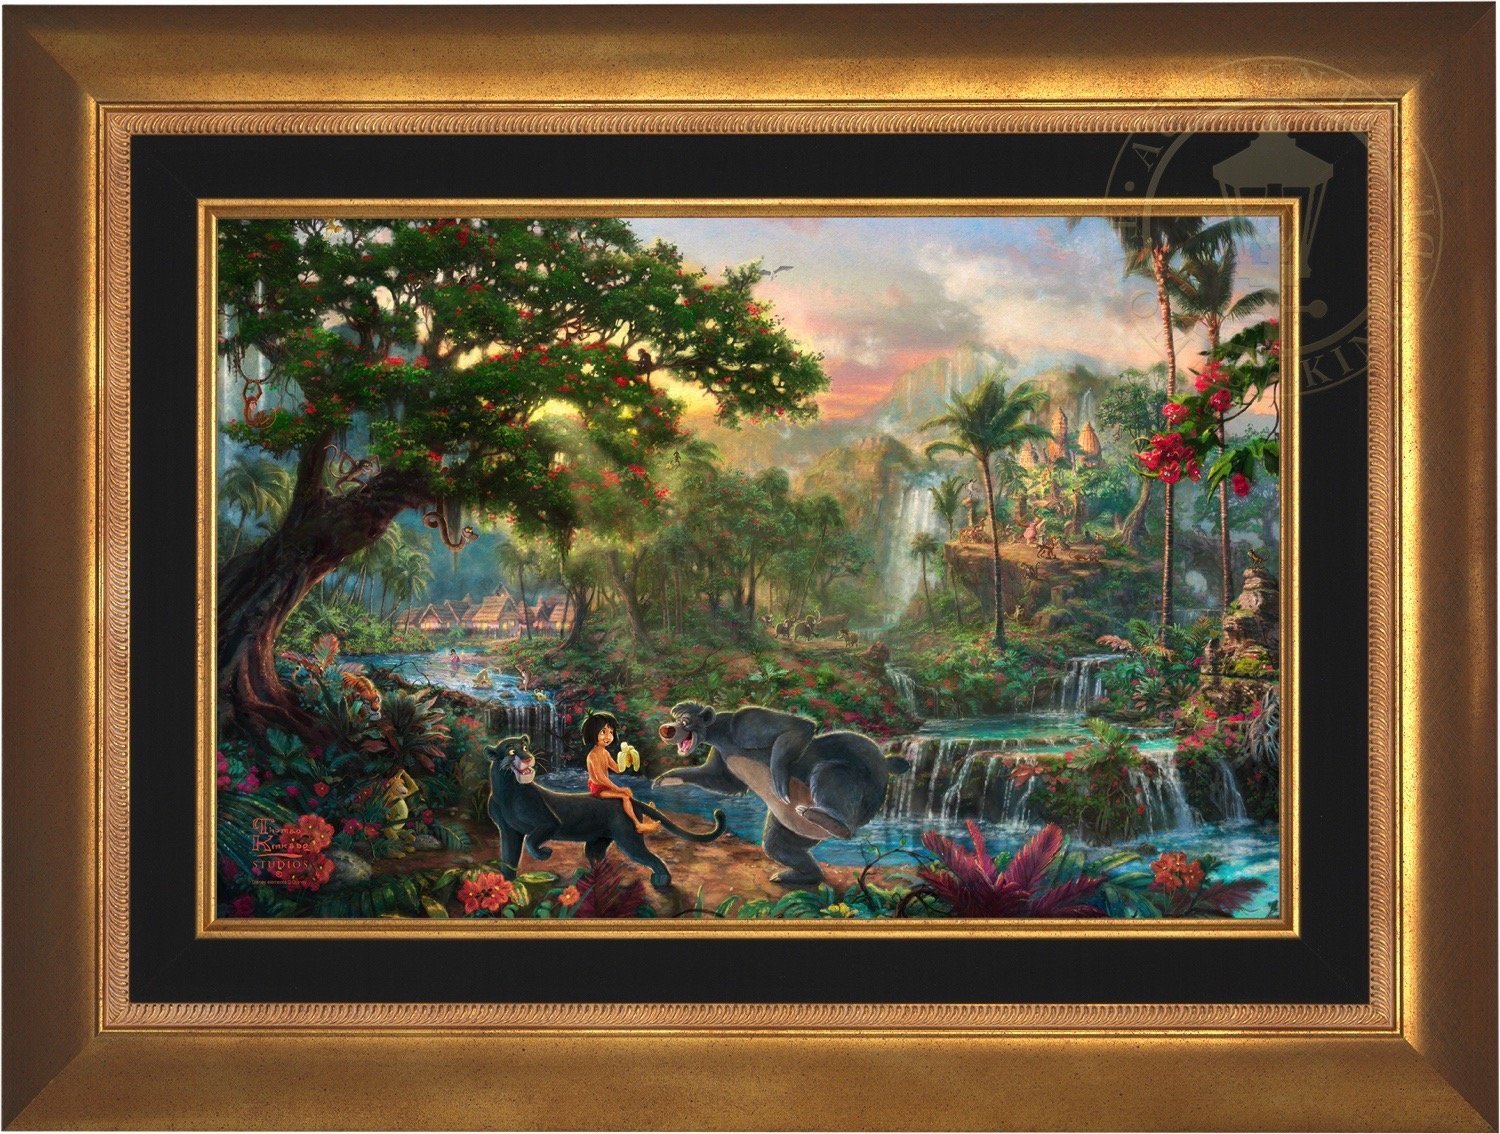 Mowgli the man-cub, the evil tiger Shere Khan, the wise panther Bagheera and Baloo, the lovable Poppa Bear - Aurora Gold Frame